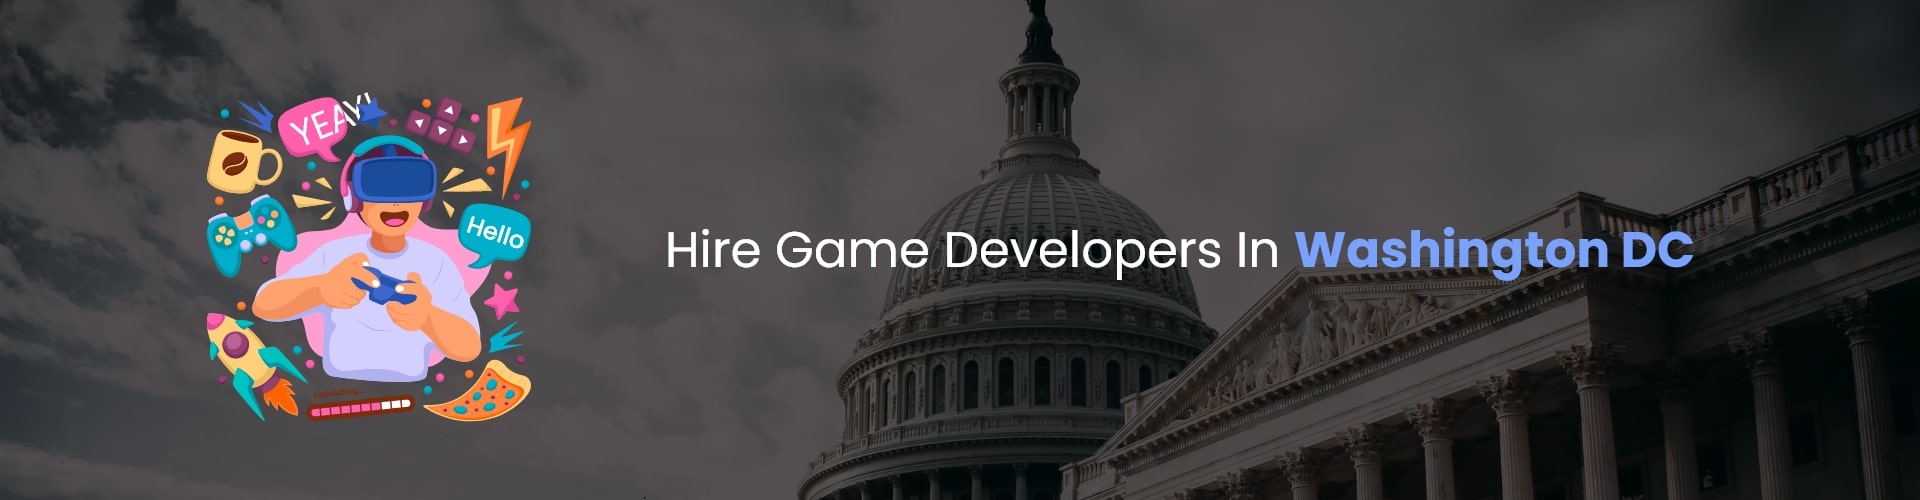 hire game developers in washington